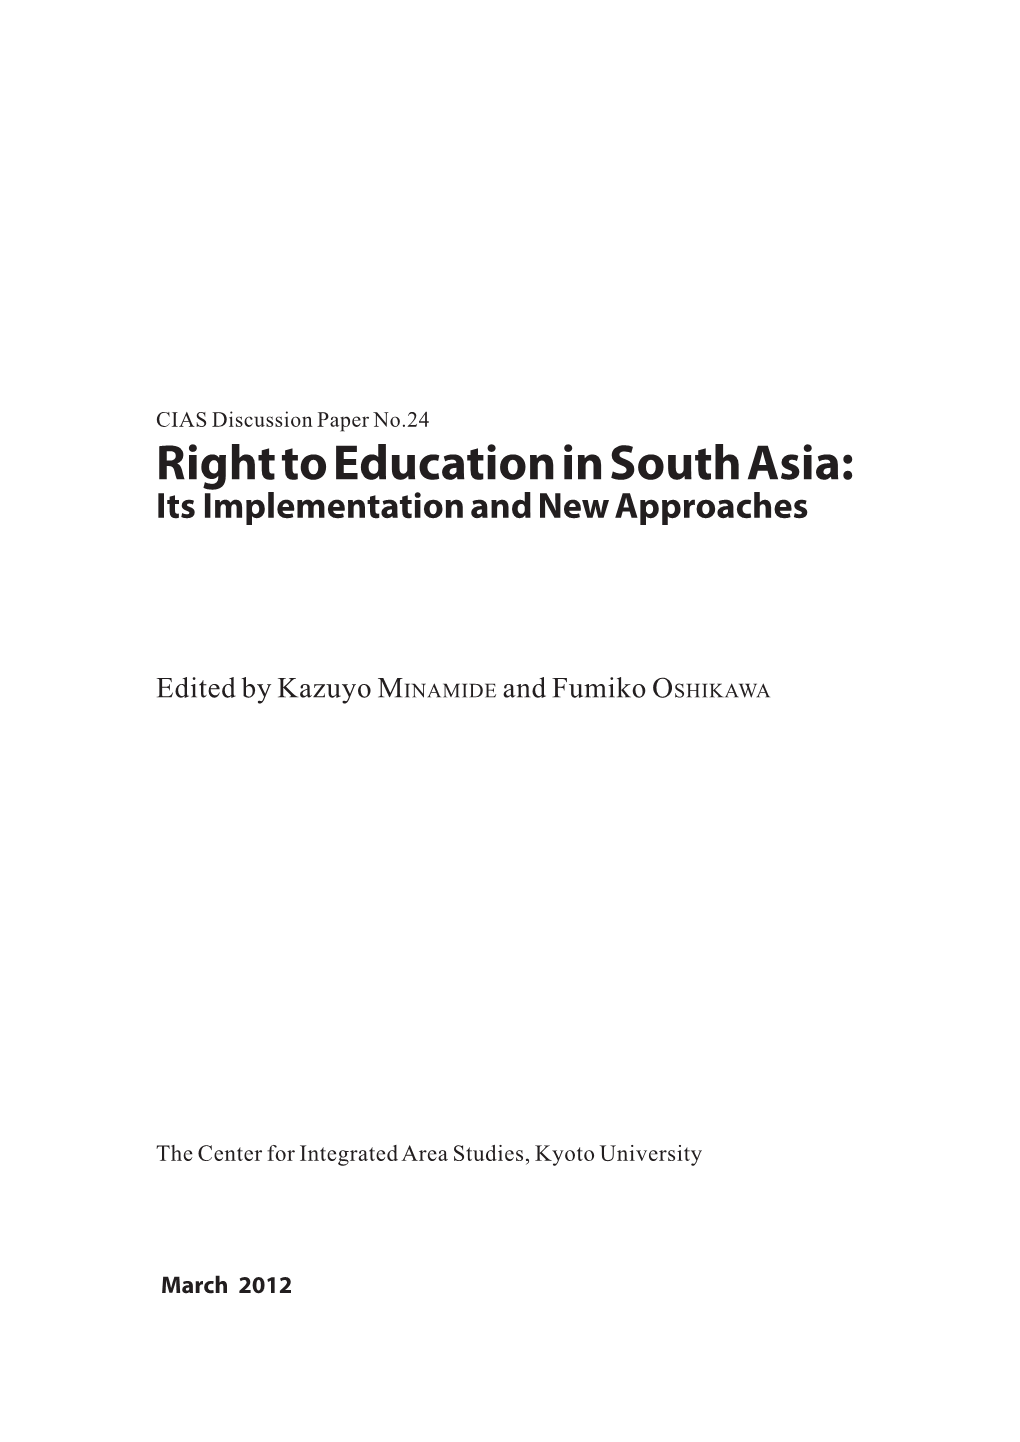 Right to Education in South Asia: Its Implementation and New Approaches